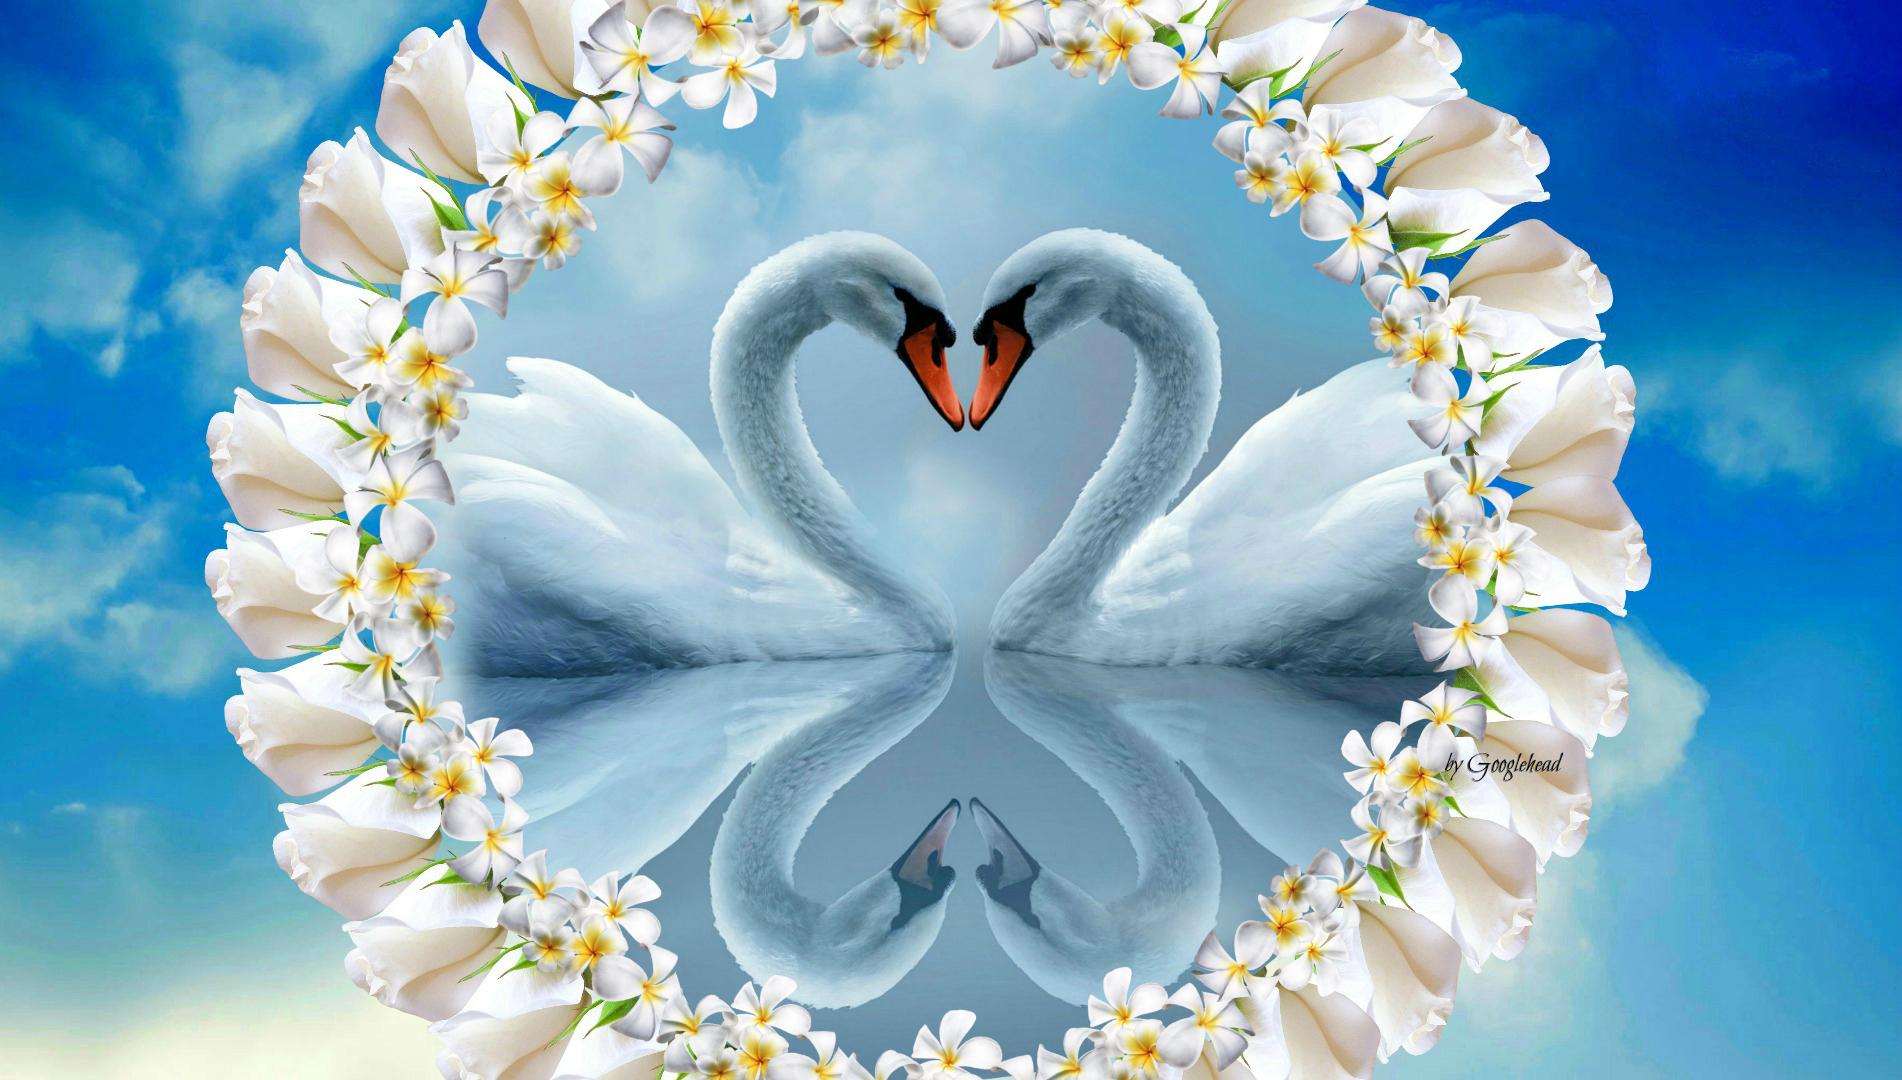 Swans love heart - (#167286) - High Quality and Resolution ...